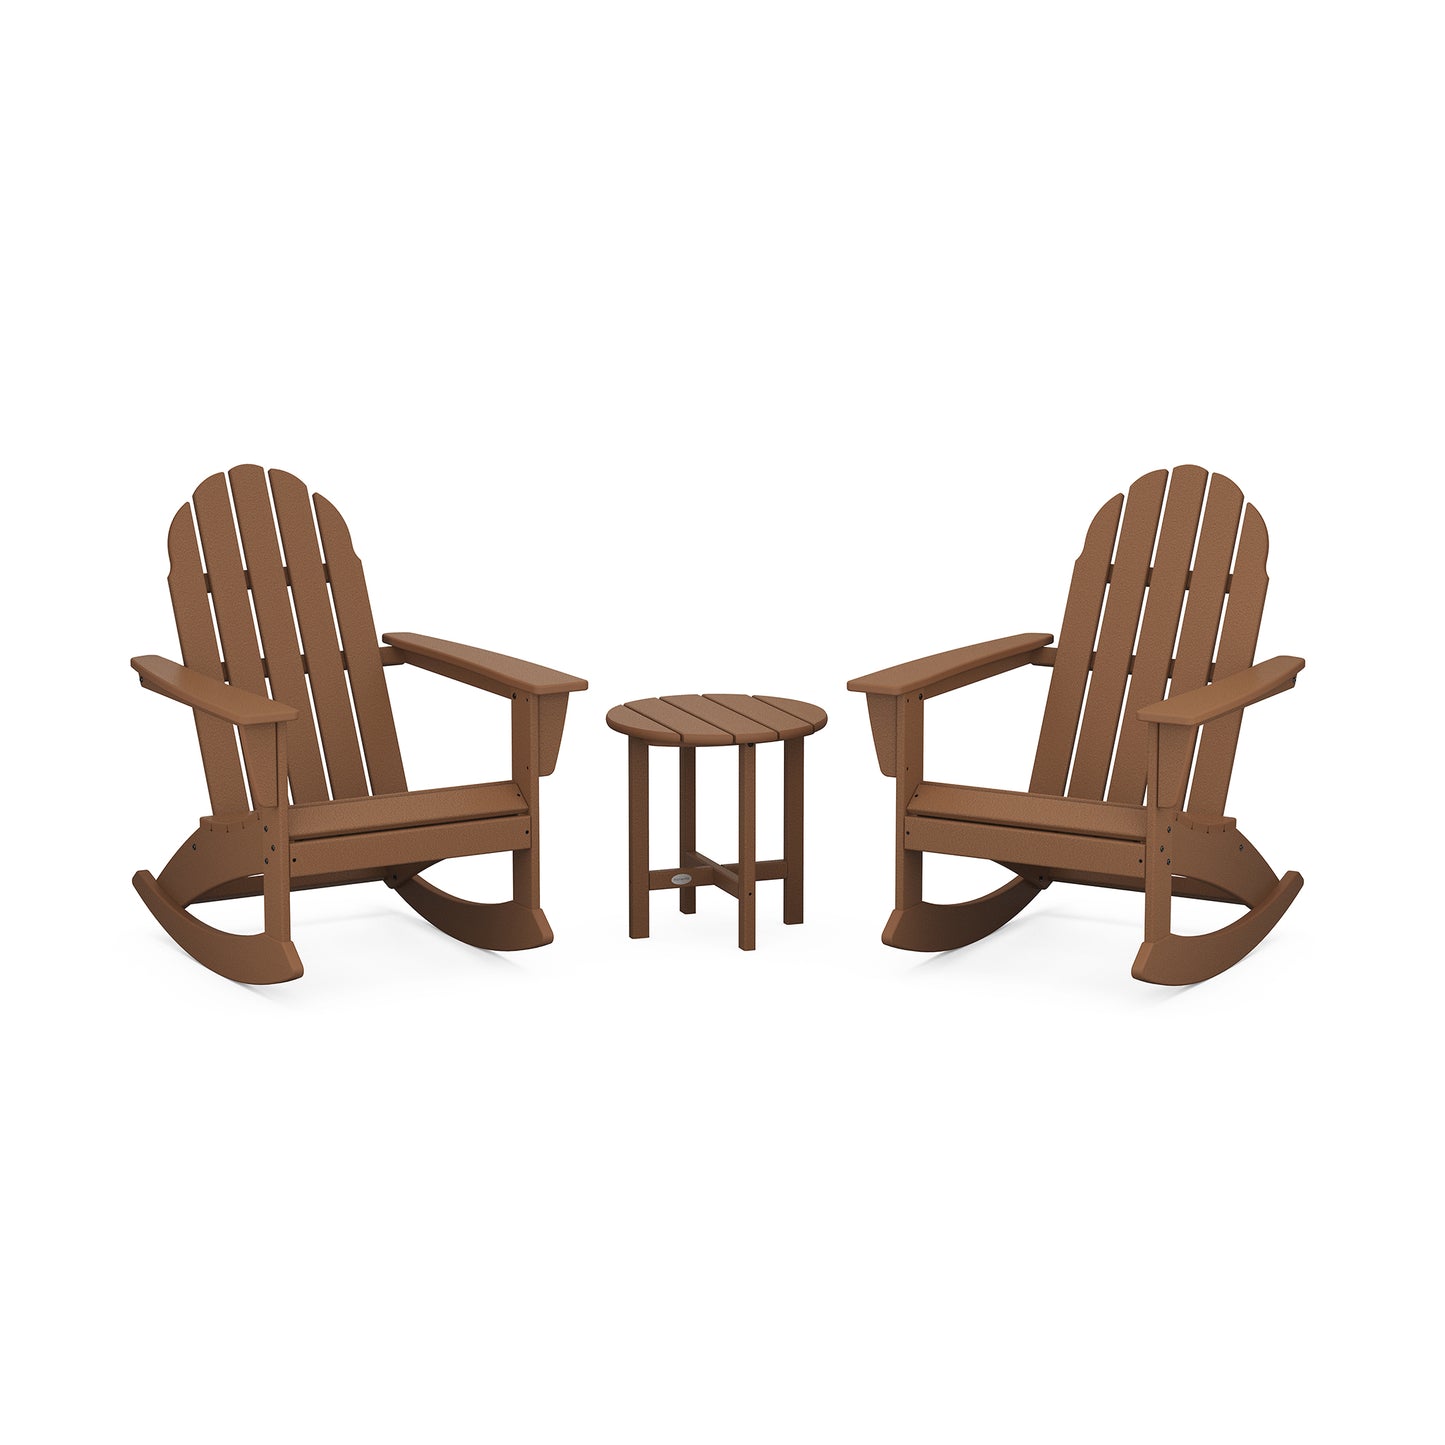 Two brown POLYWOOD Vineyard 3-Piece Adirondack Rocking Chairs facing each other with a small round table between them, set against a plain white background.